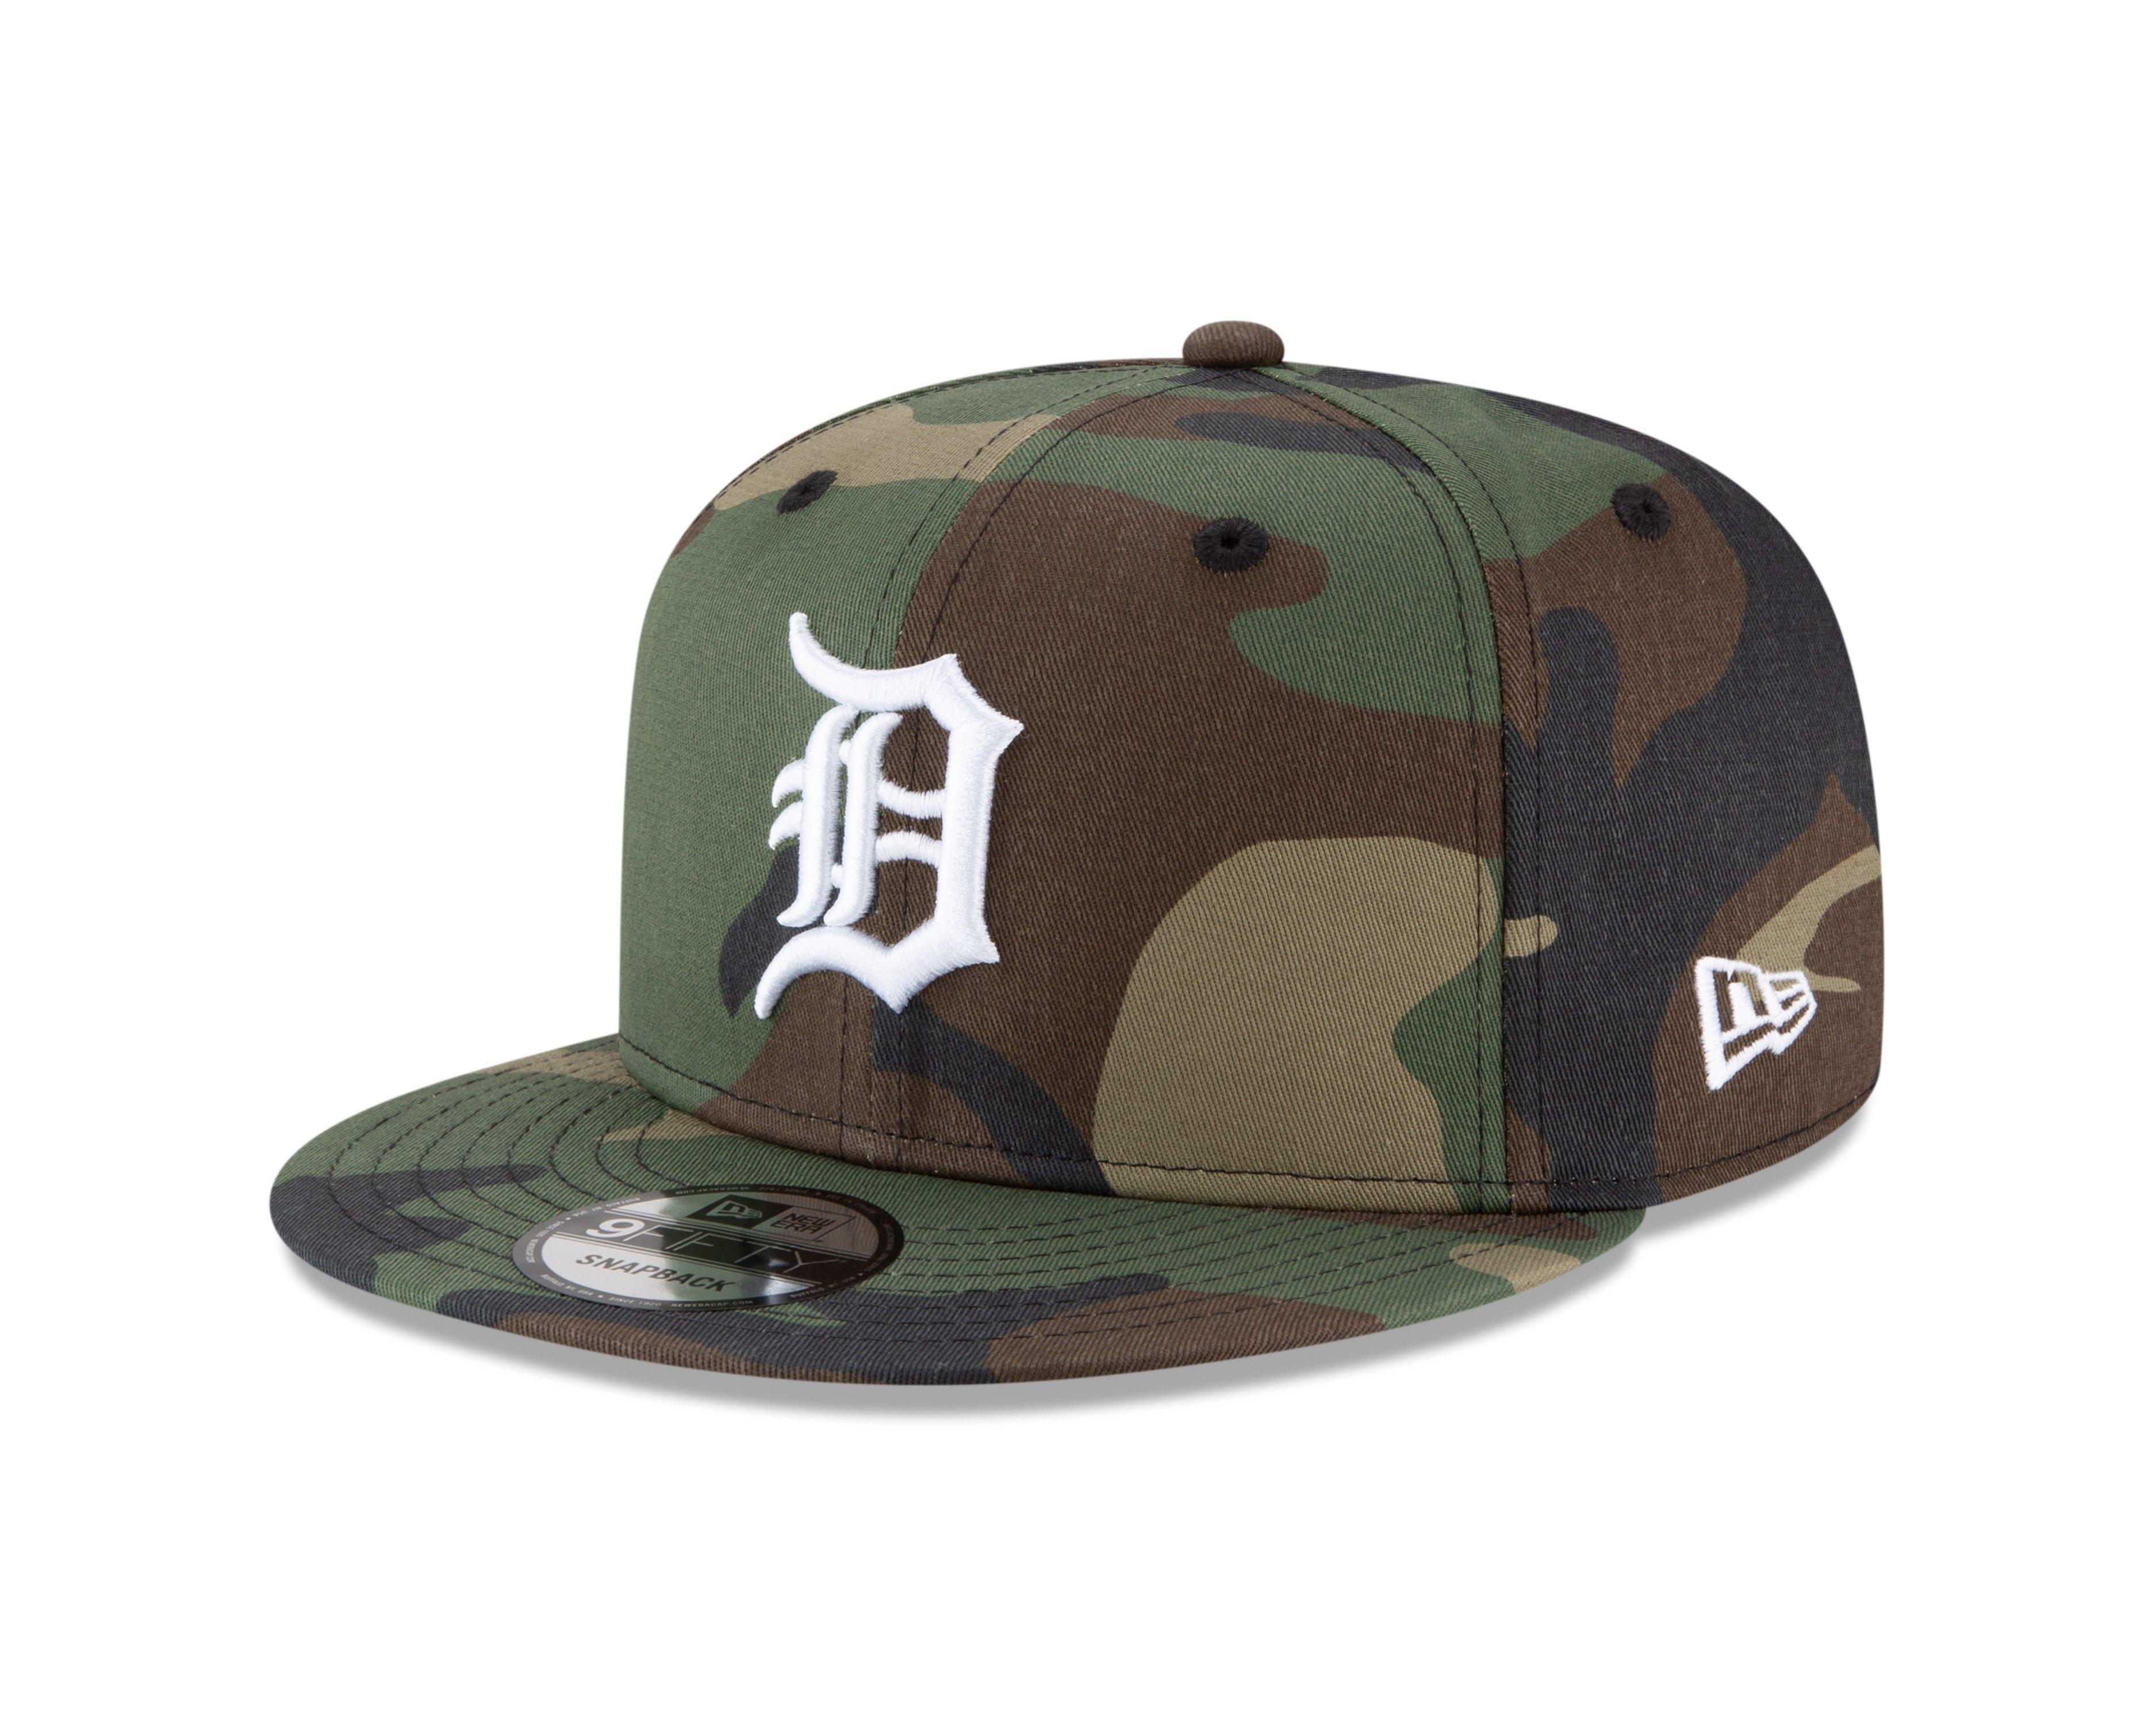 KTZ Detroit Tigers League O'gold 9fifty Snapback Cap in Blue for